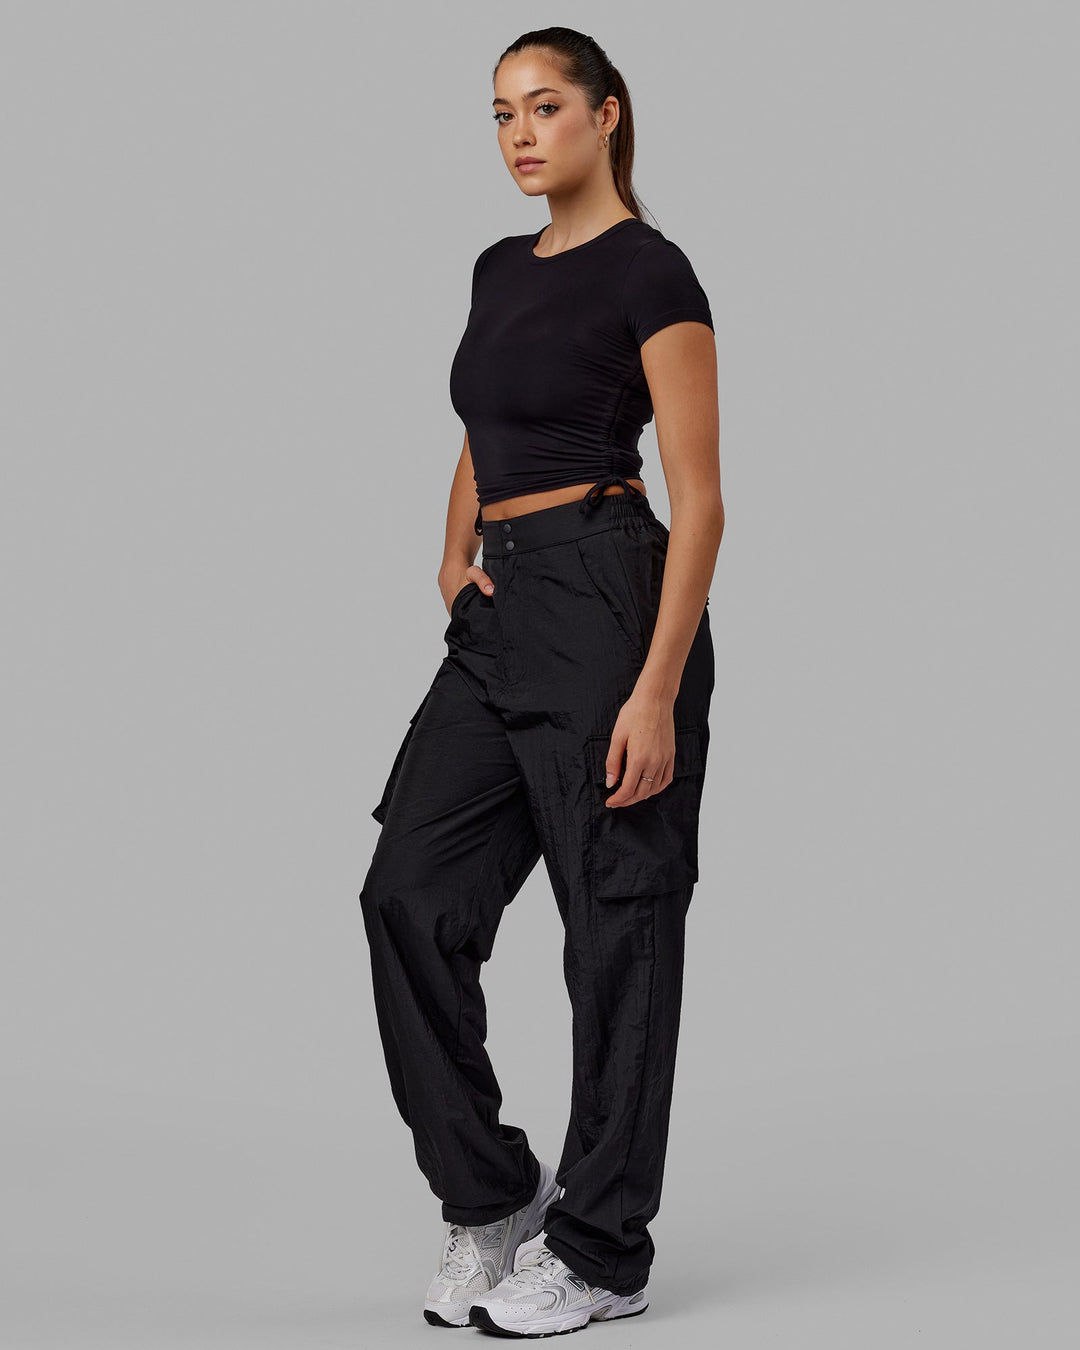 Unisex All Day Performance Cargo Pant - Black